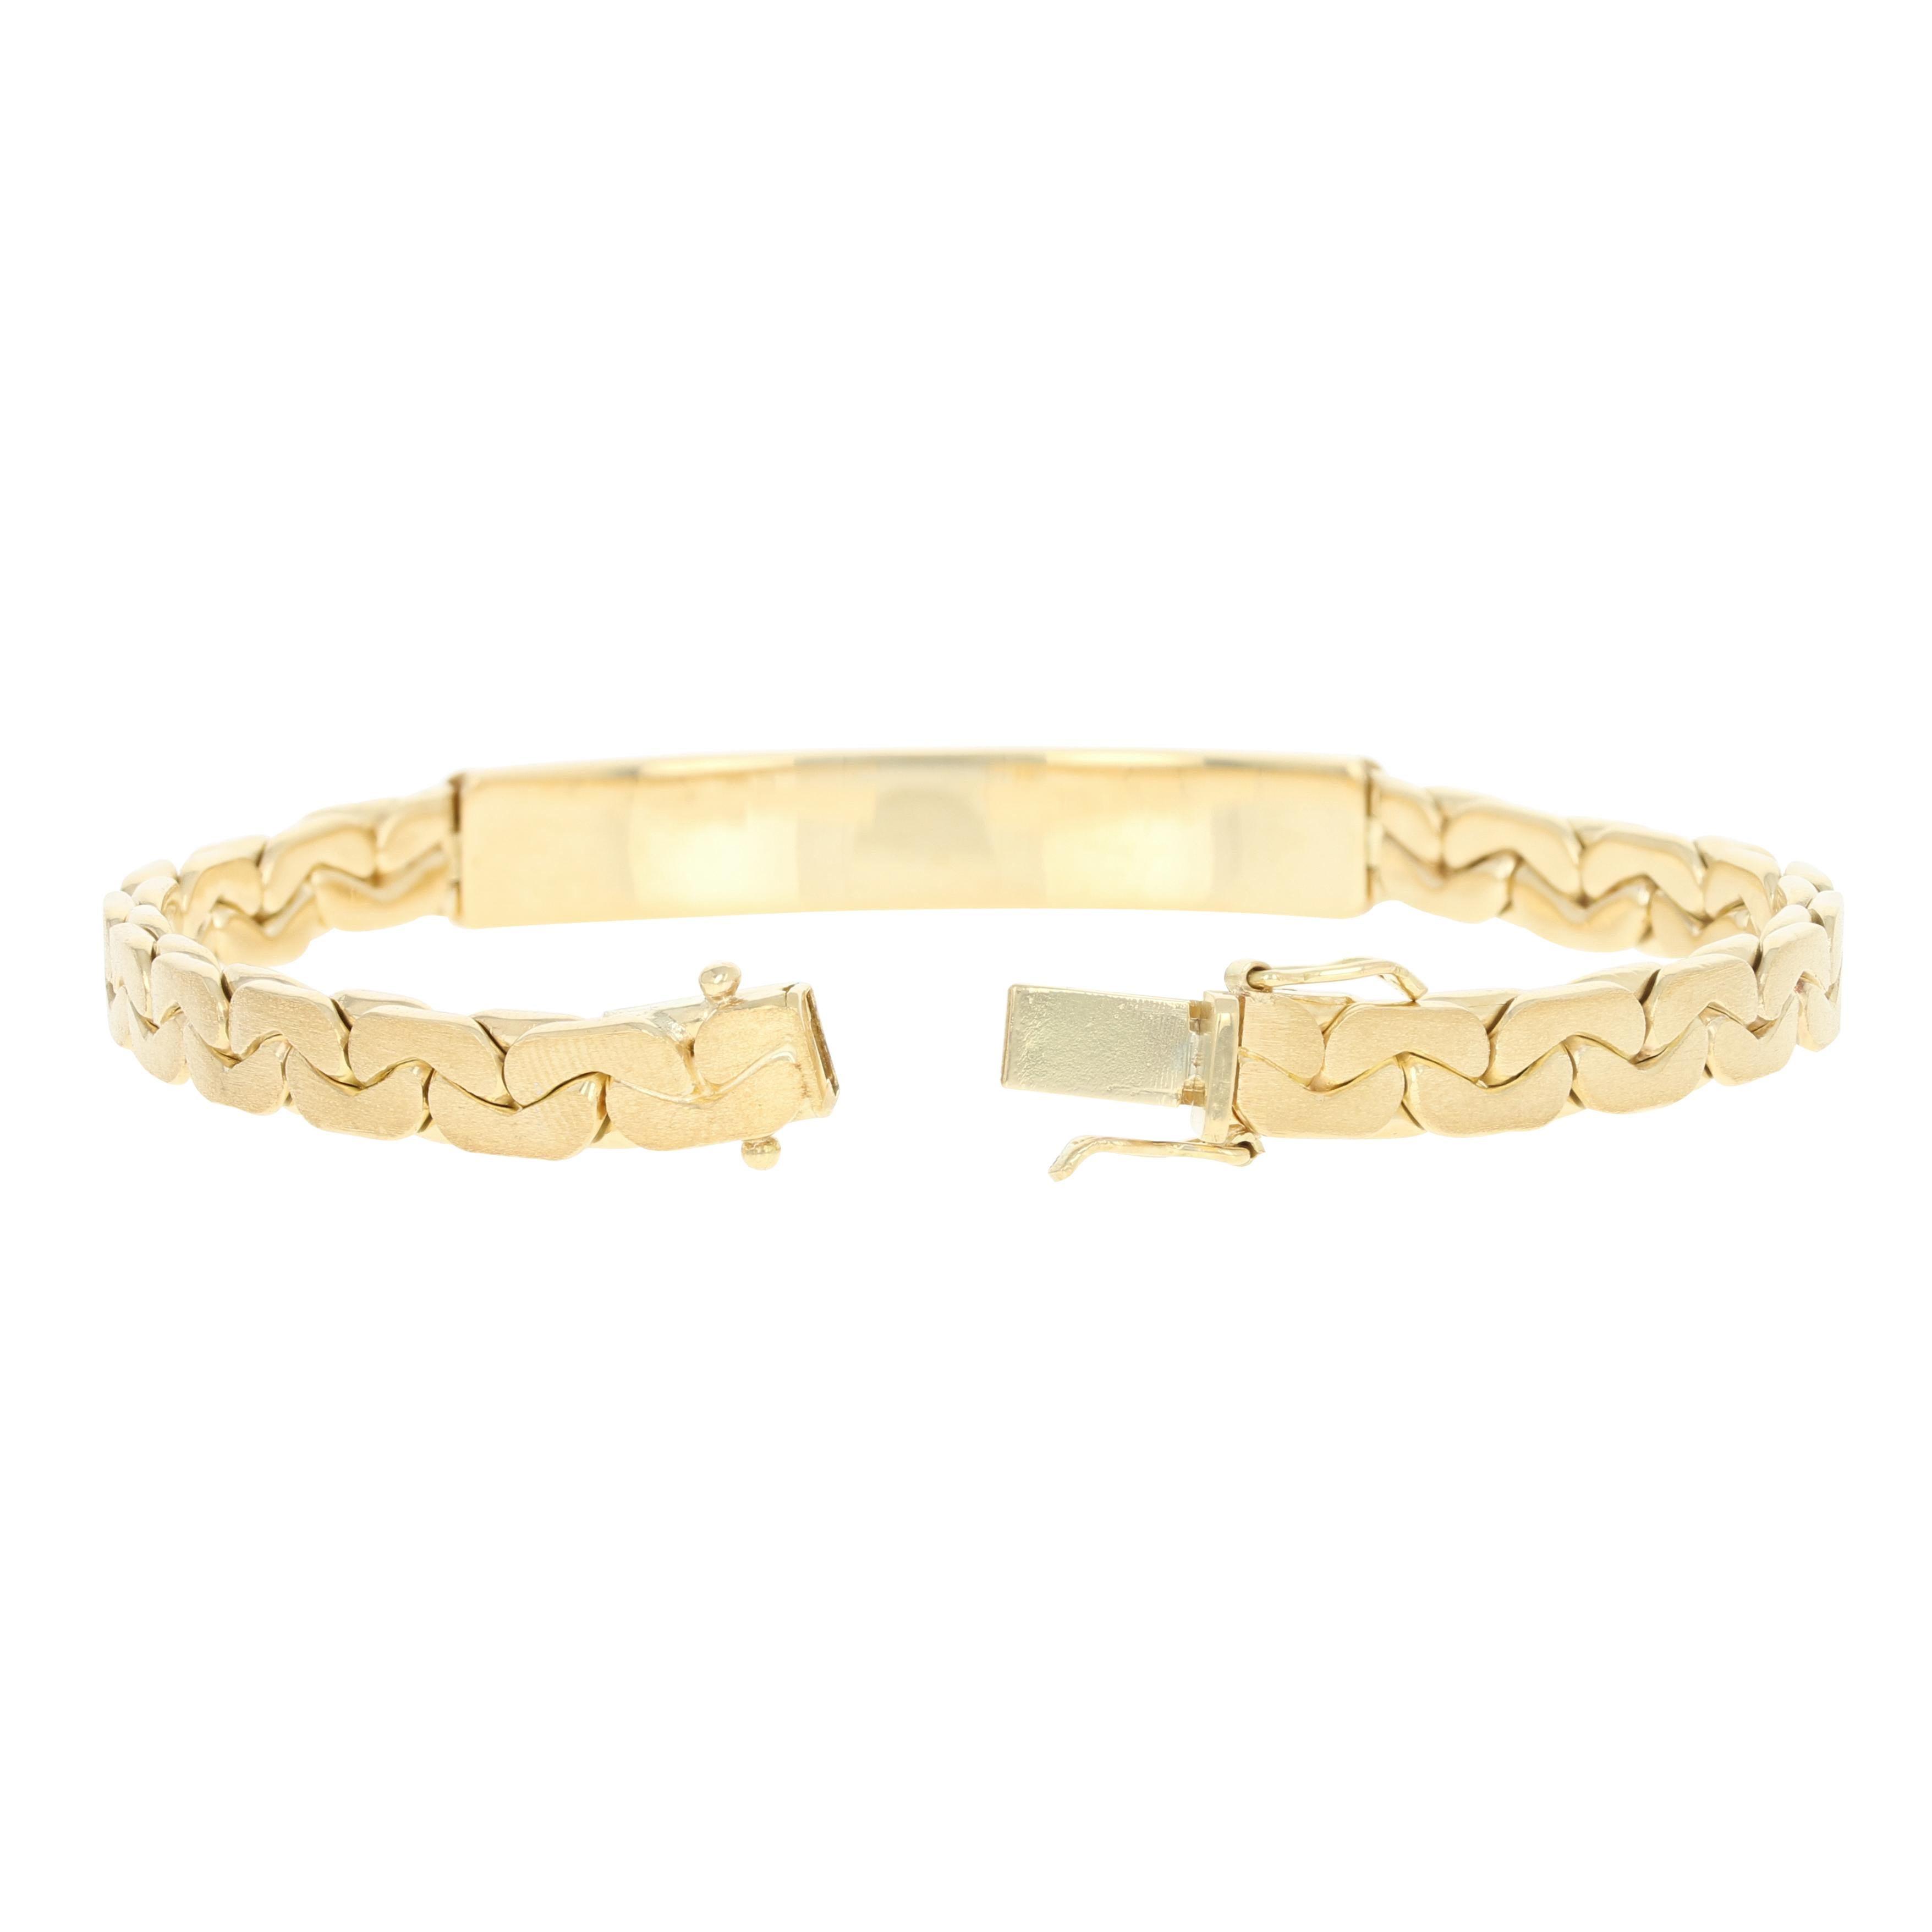 Looking sharp! Featuring a luminous matte finish, this 18k yellow gold identification bracelet displays a curved rectangular bar, which can be engraved by your local jeweler, that is set in the center of the C link chain band.  

Metal Content: